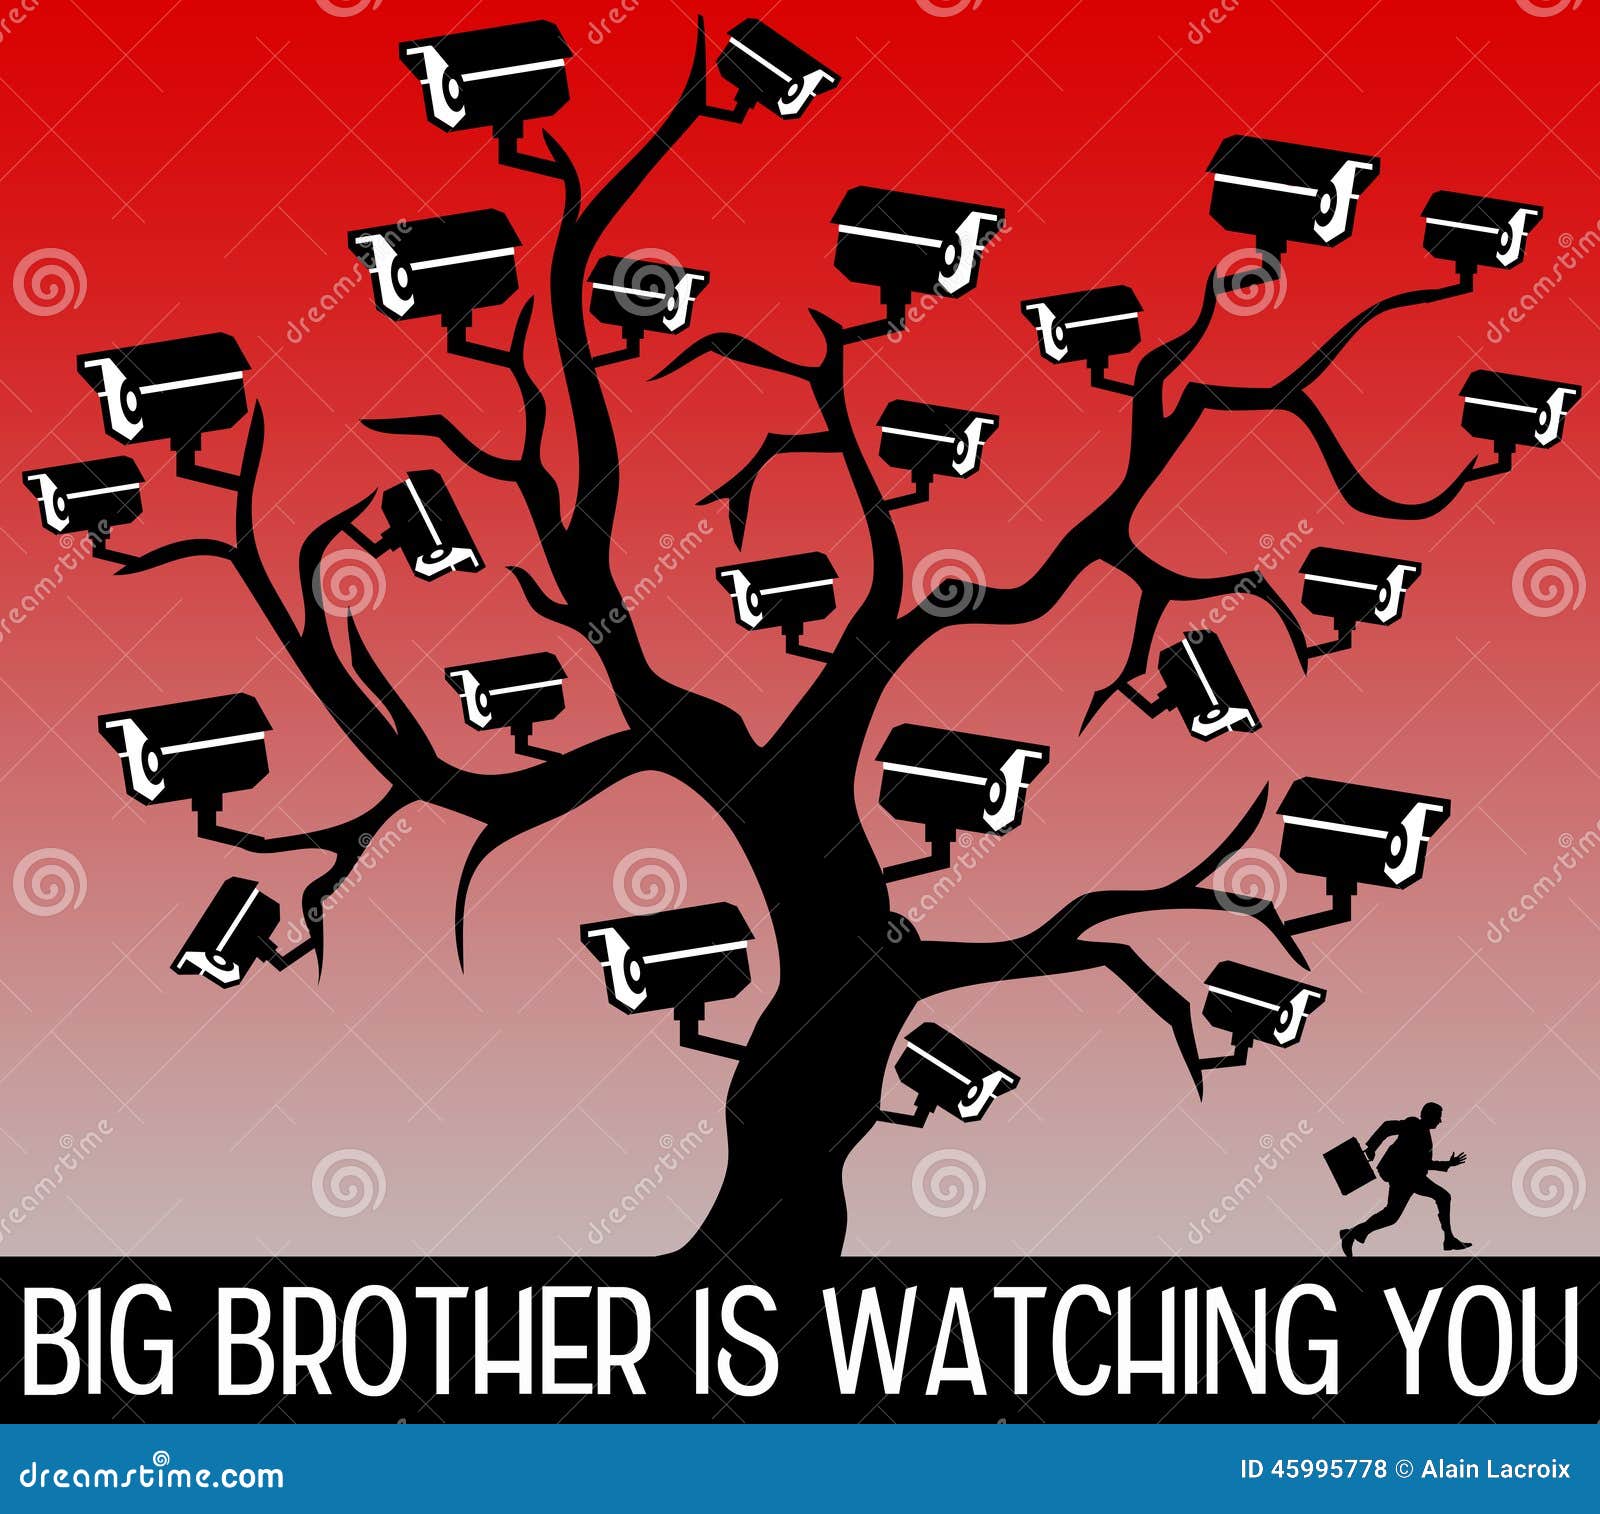 clipart big brother watching you - photo #6